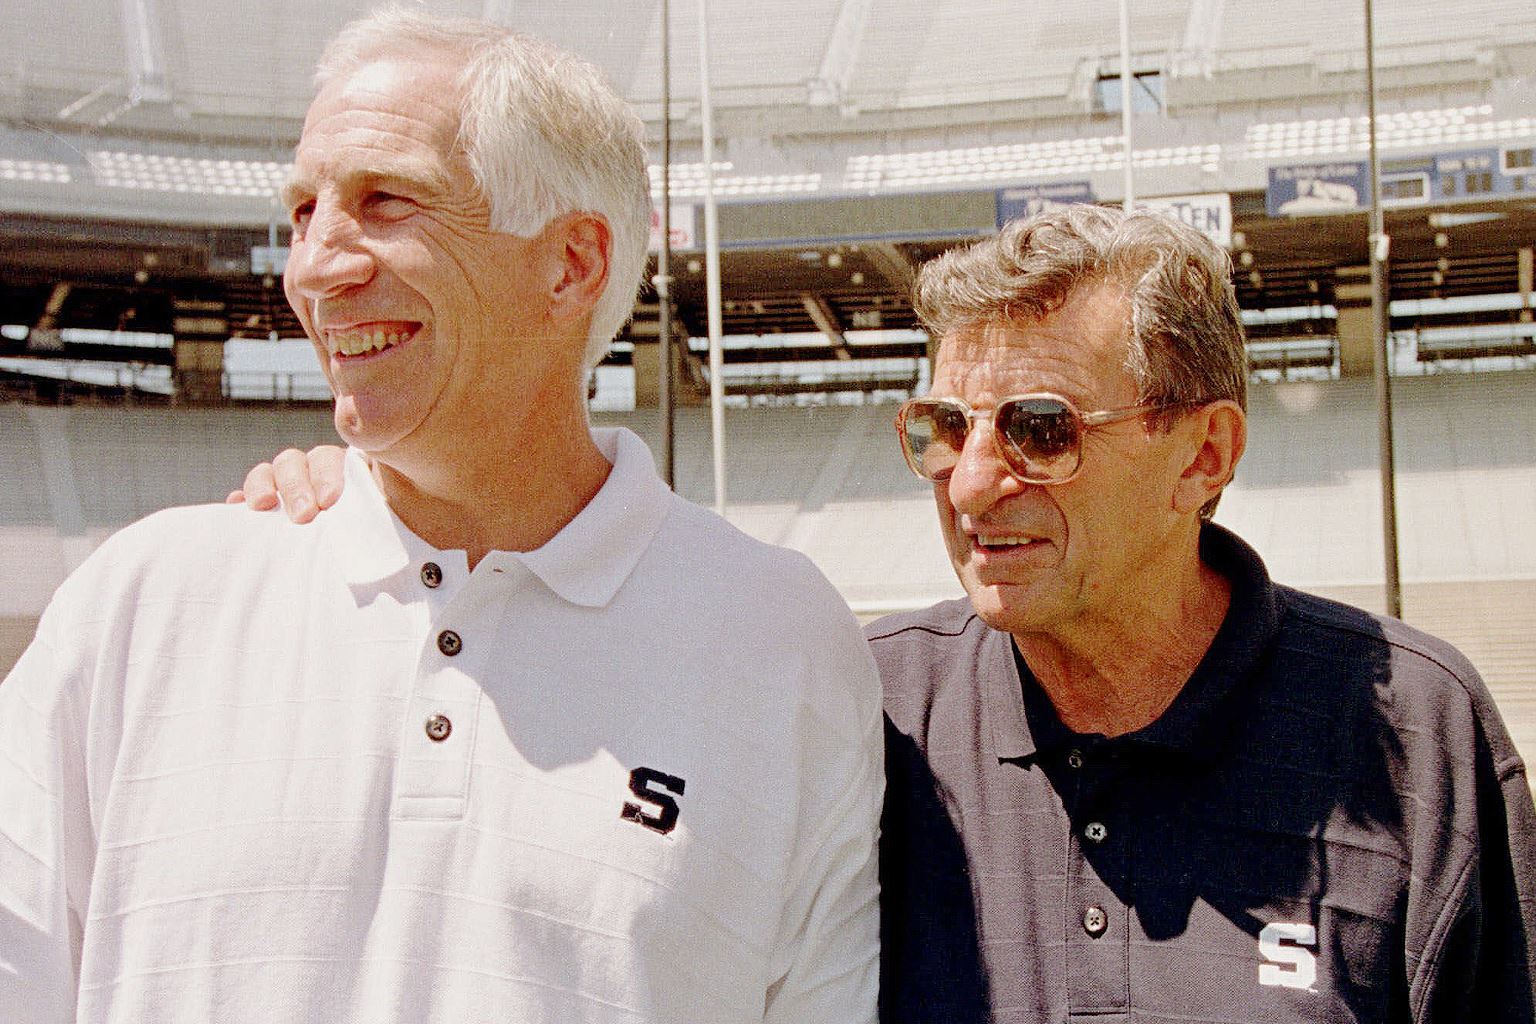 Despite criticism, Penn State honors Paterno during game